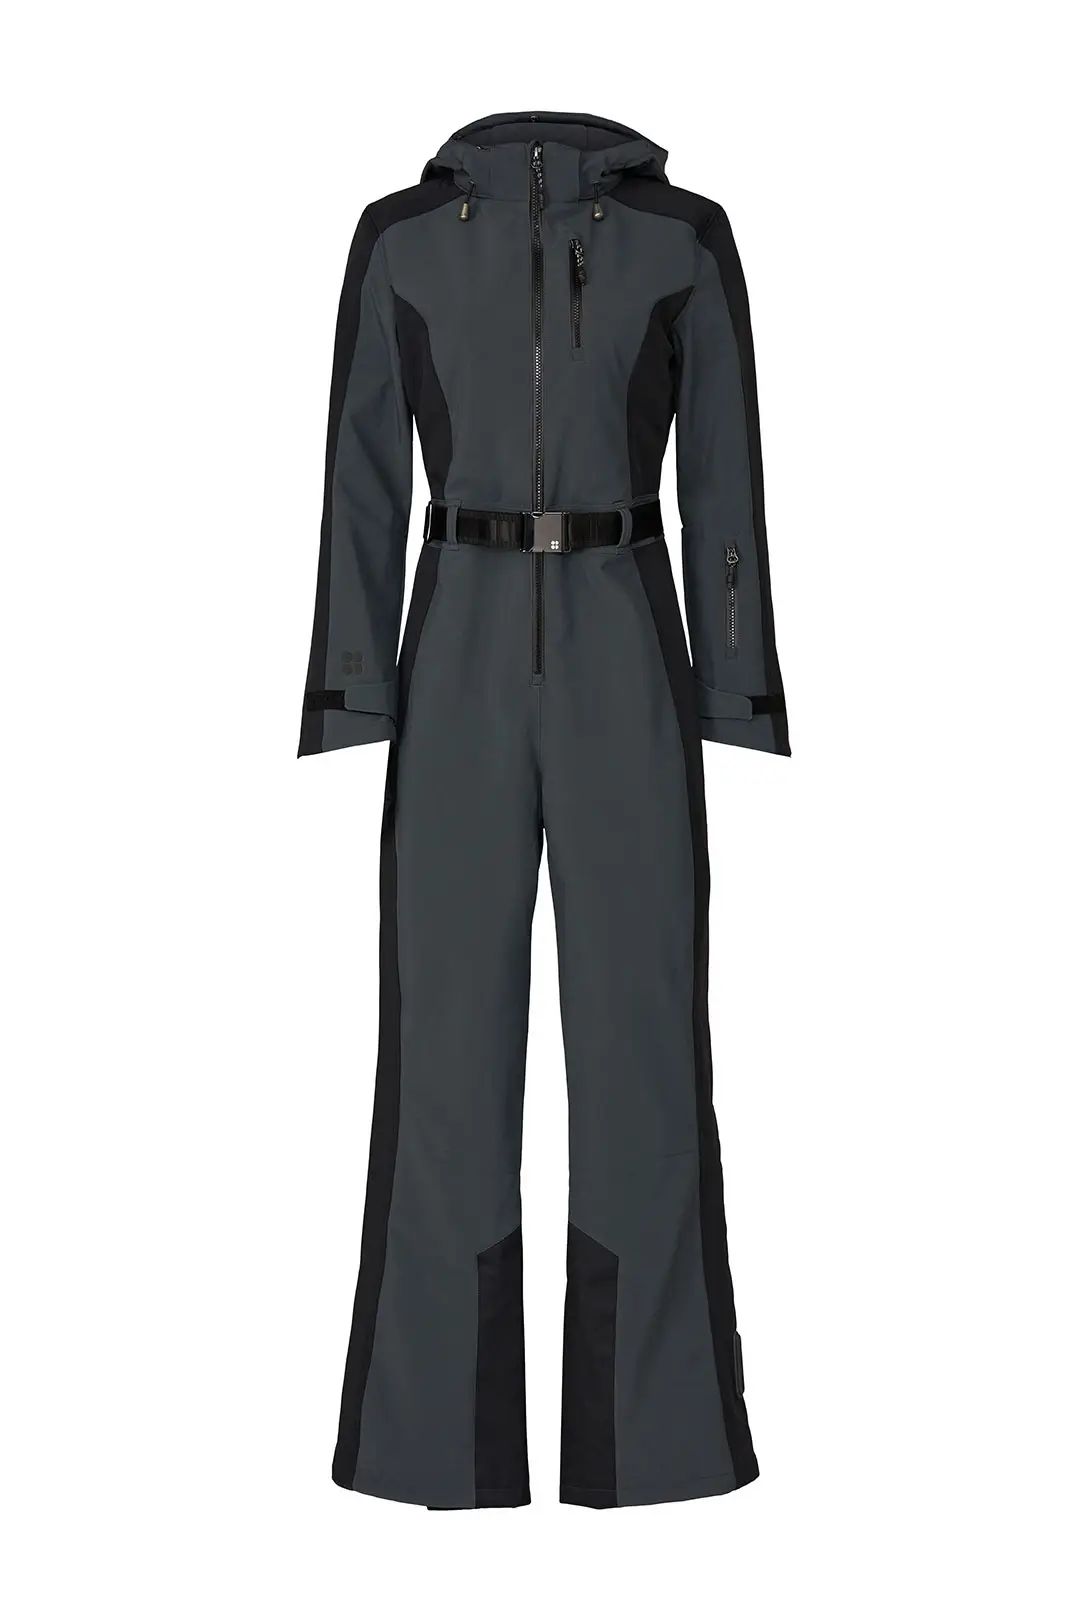 Sweaty Betty Backcountry Ski All In One Jumpsuit | Rent the Runway